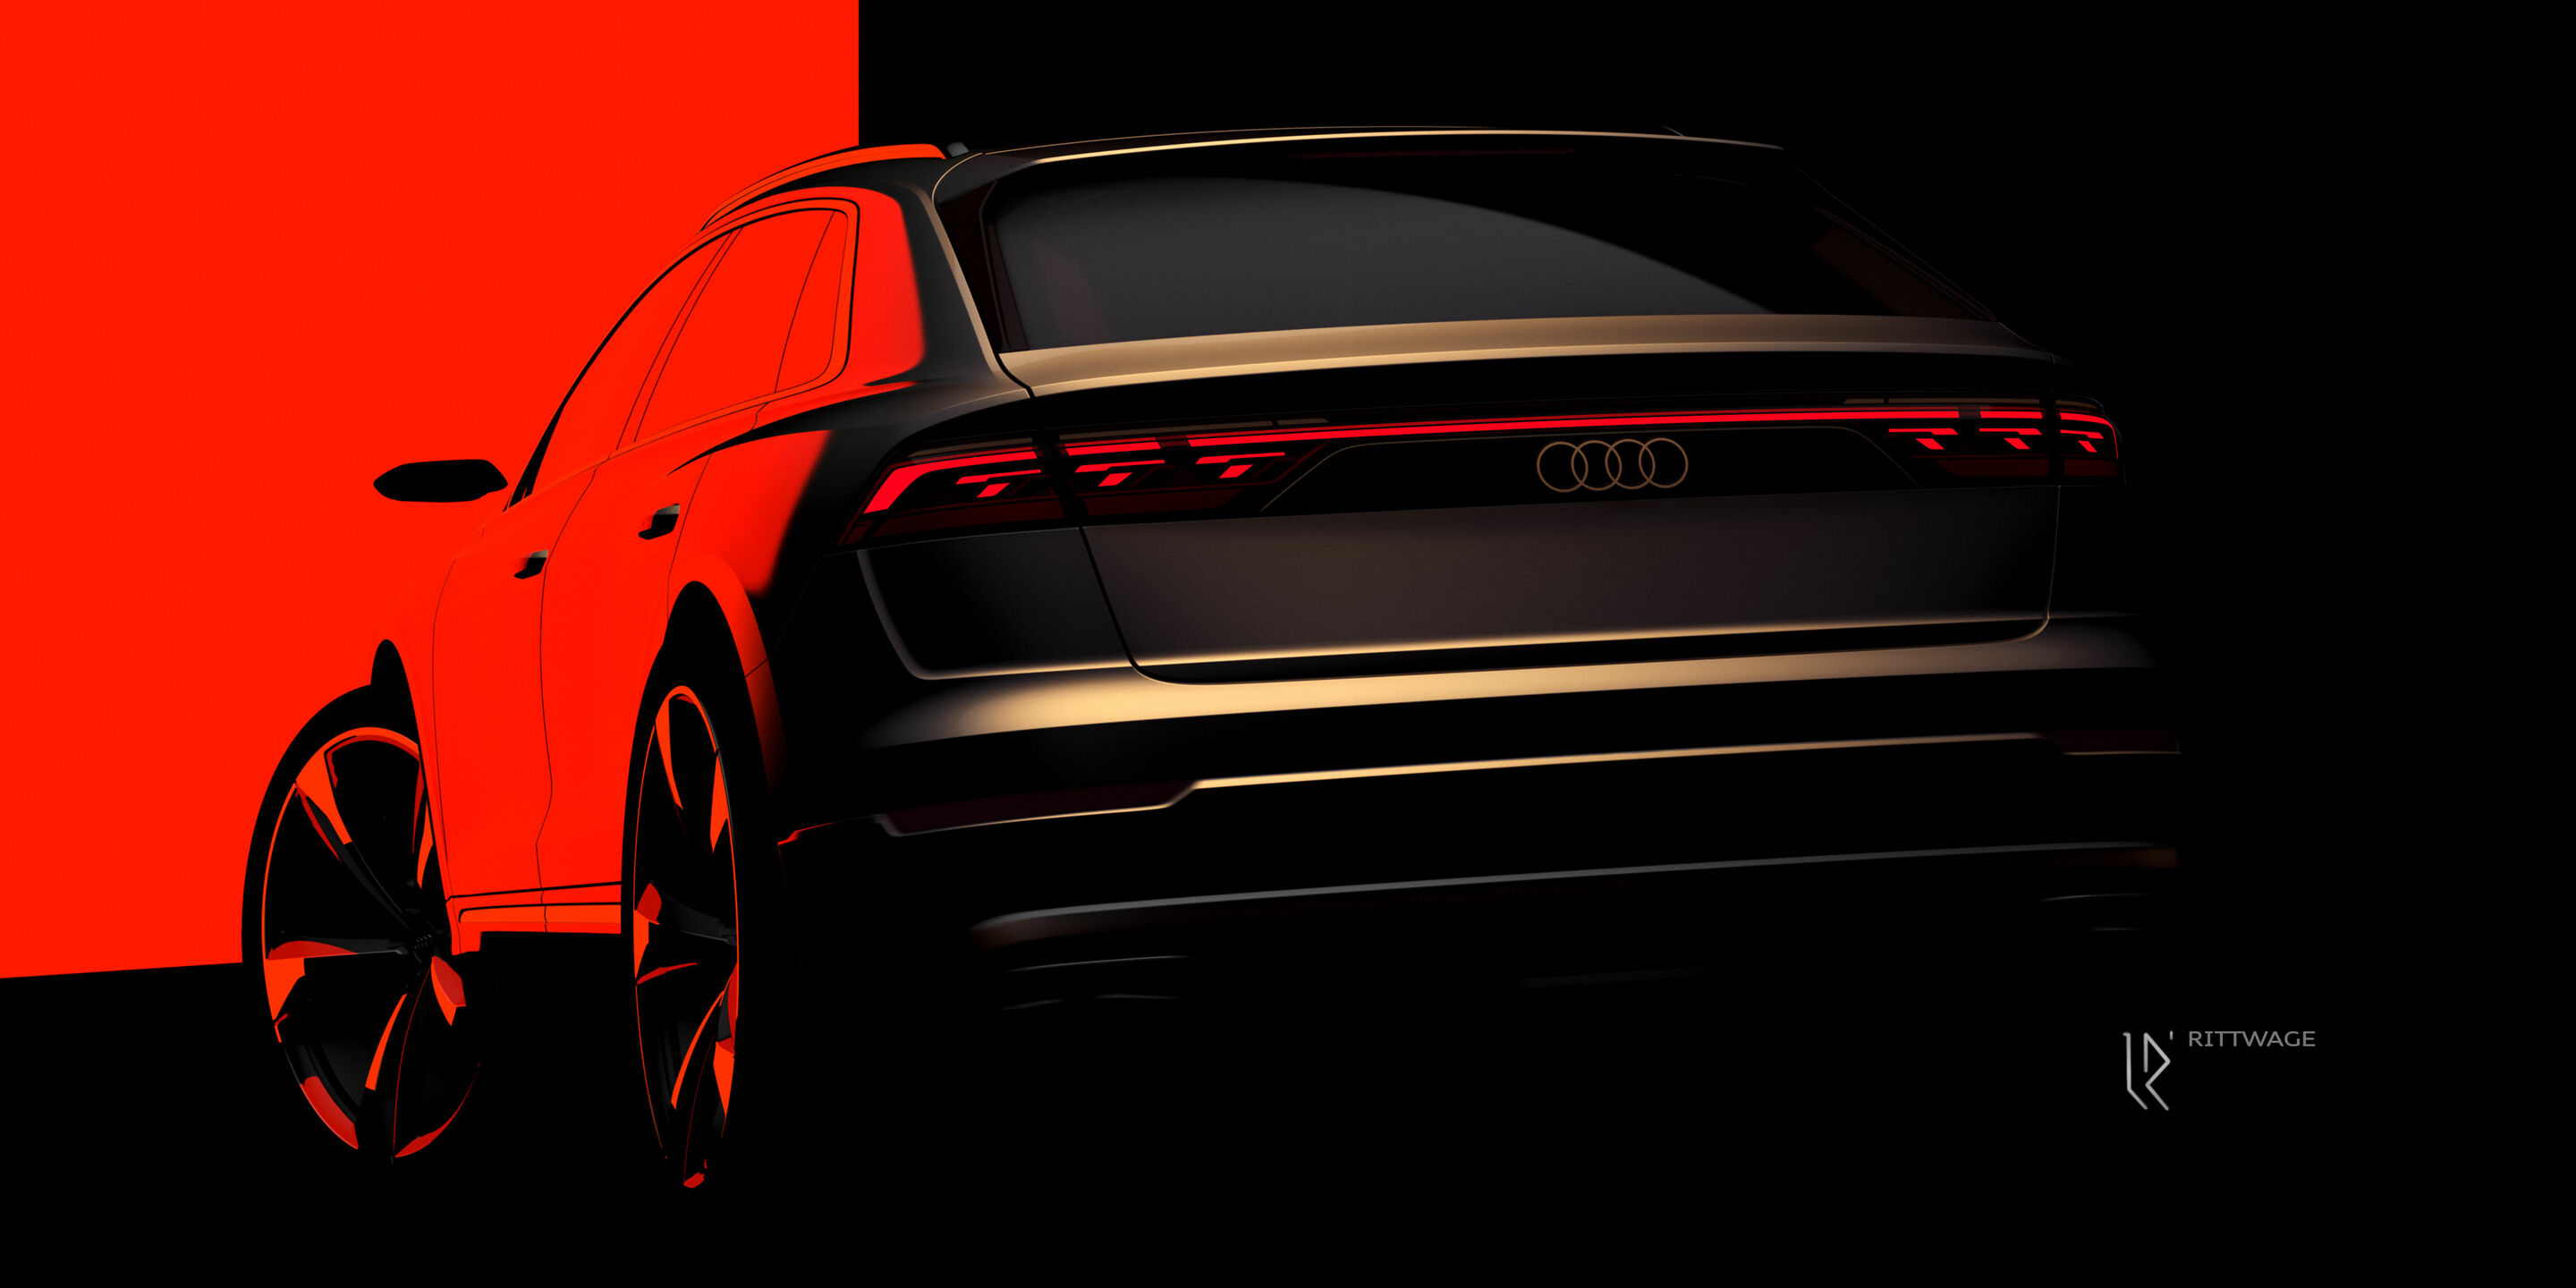 Sporty elegance in its most beautiful form: the new Audi Q8